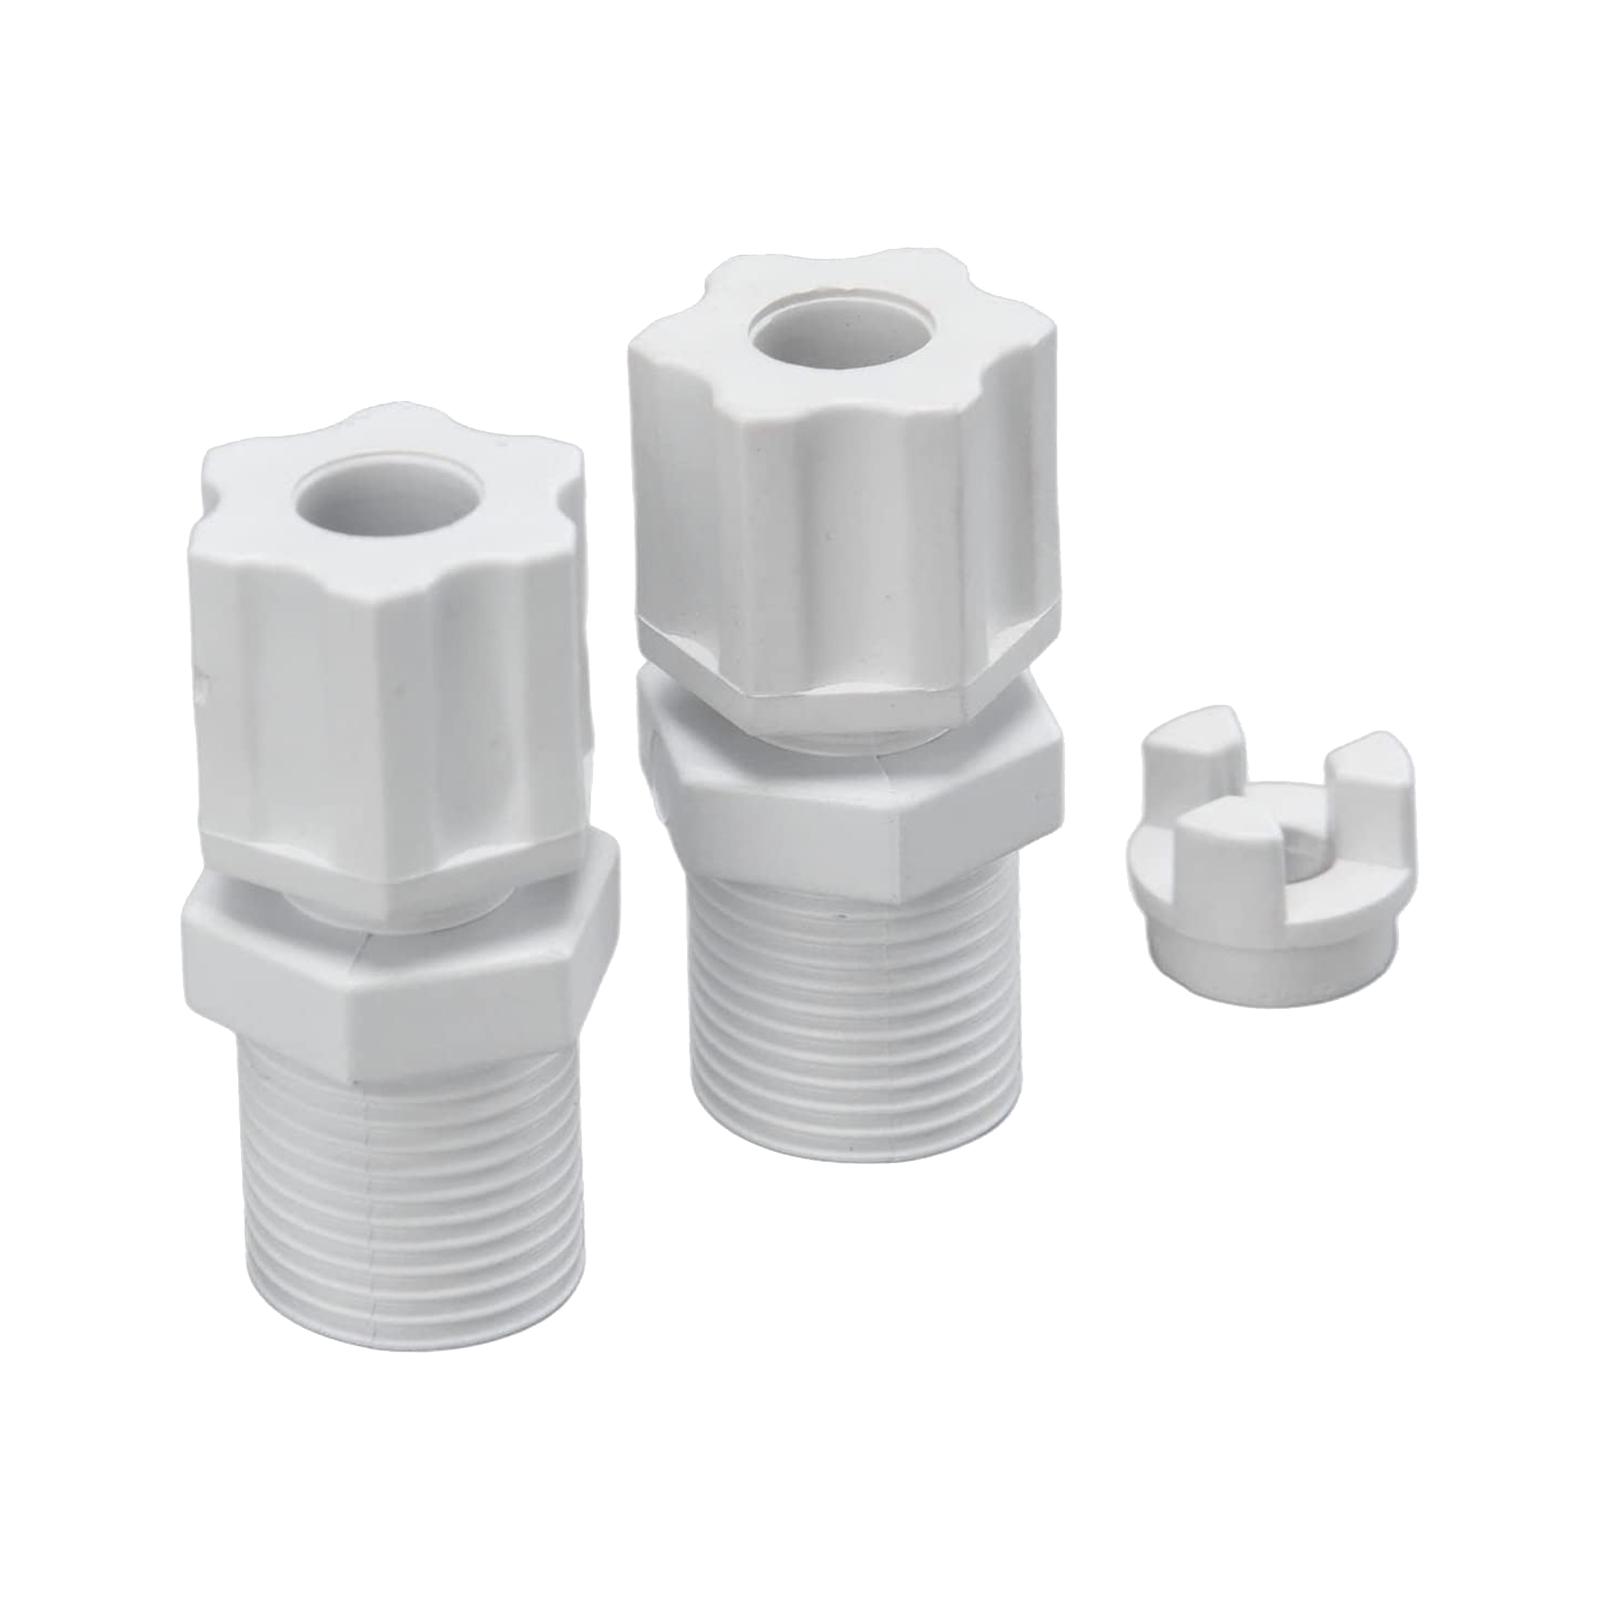 2 Pieces Replace Clorinator Parts Easy to Install Stable 1/4